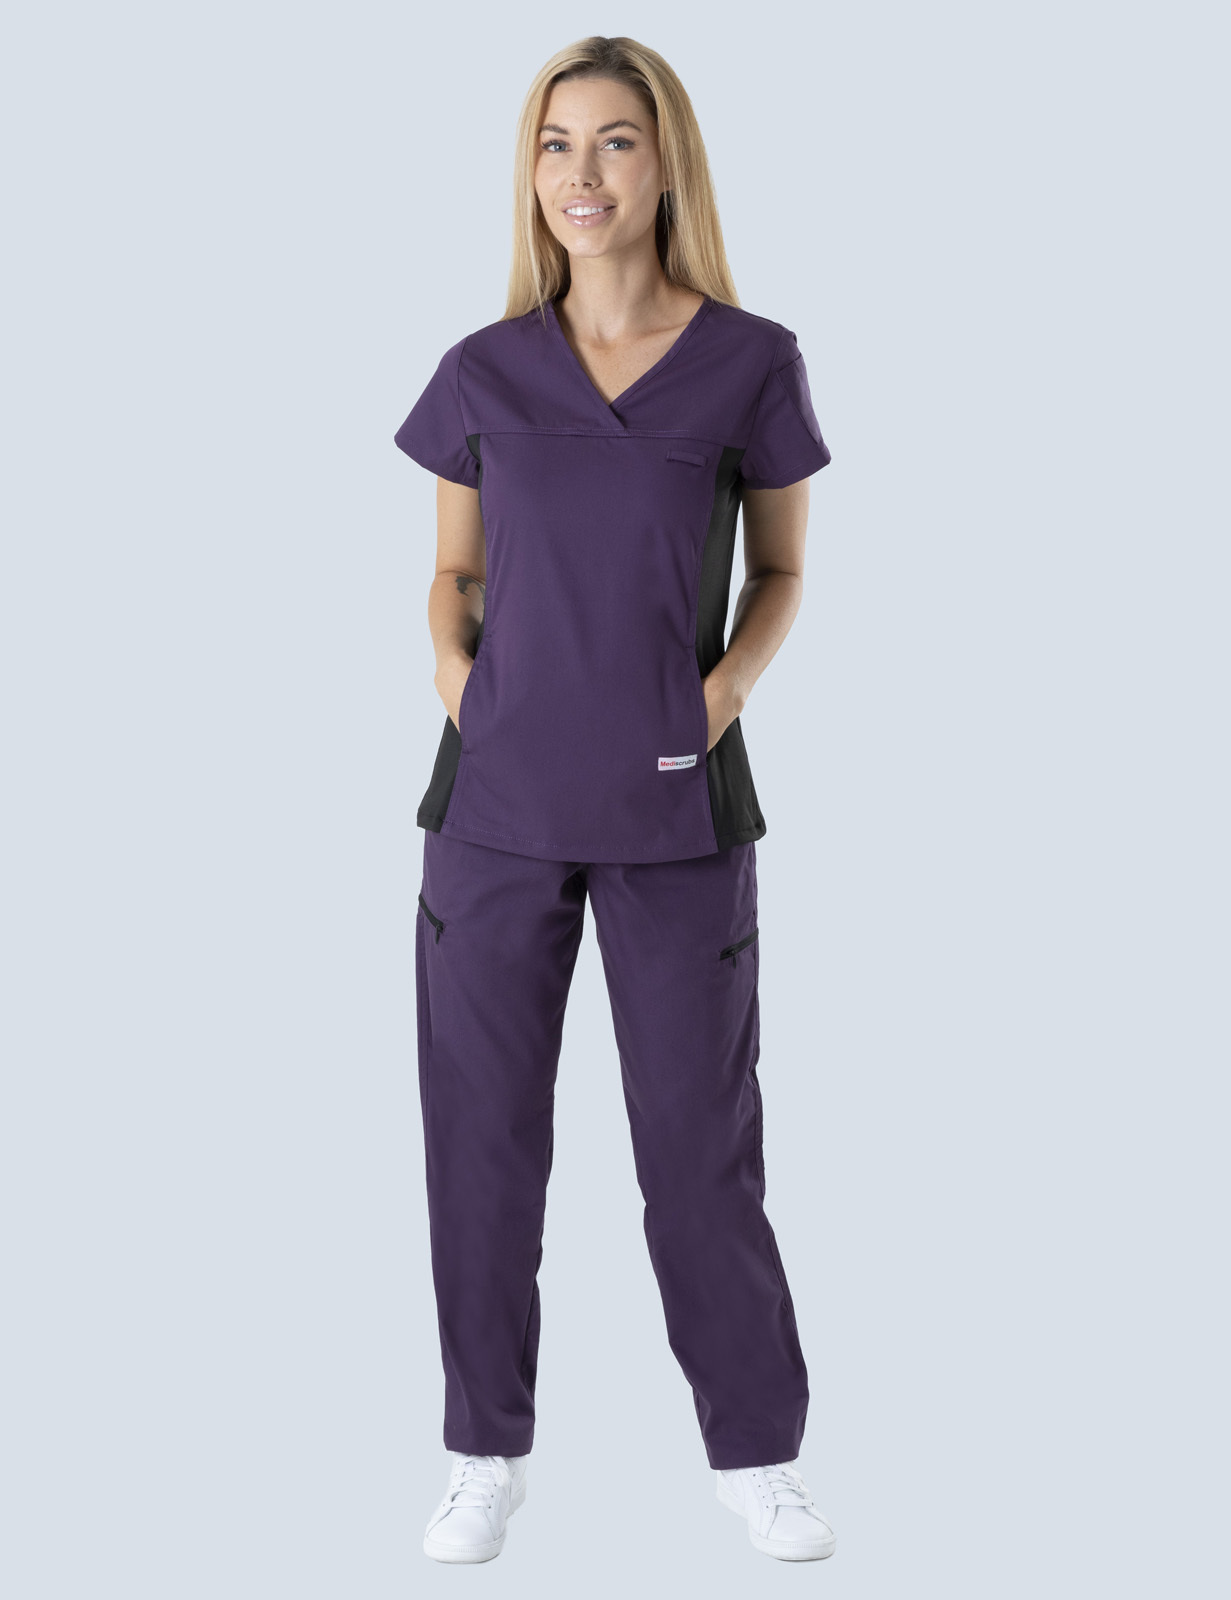 Ipswich Hospital Midwifery (Women's Fit Spandex Scrub Top and Cargo Pants in Aubergine incl Logos)